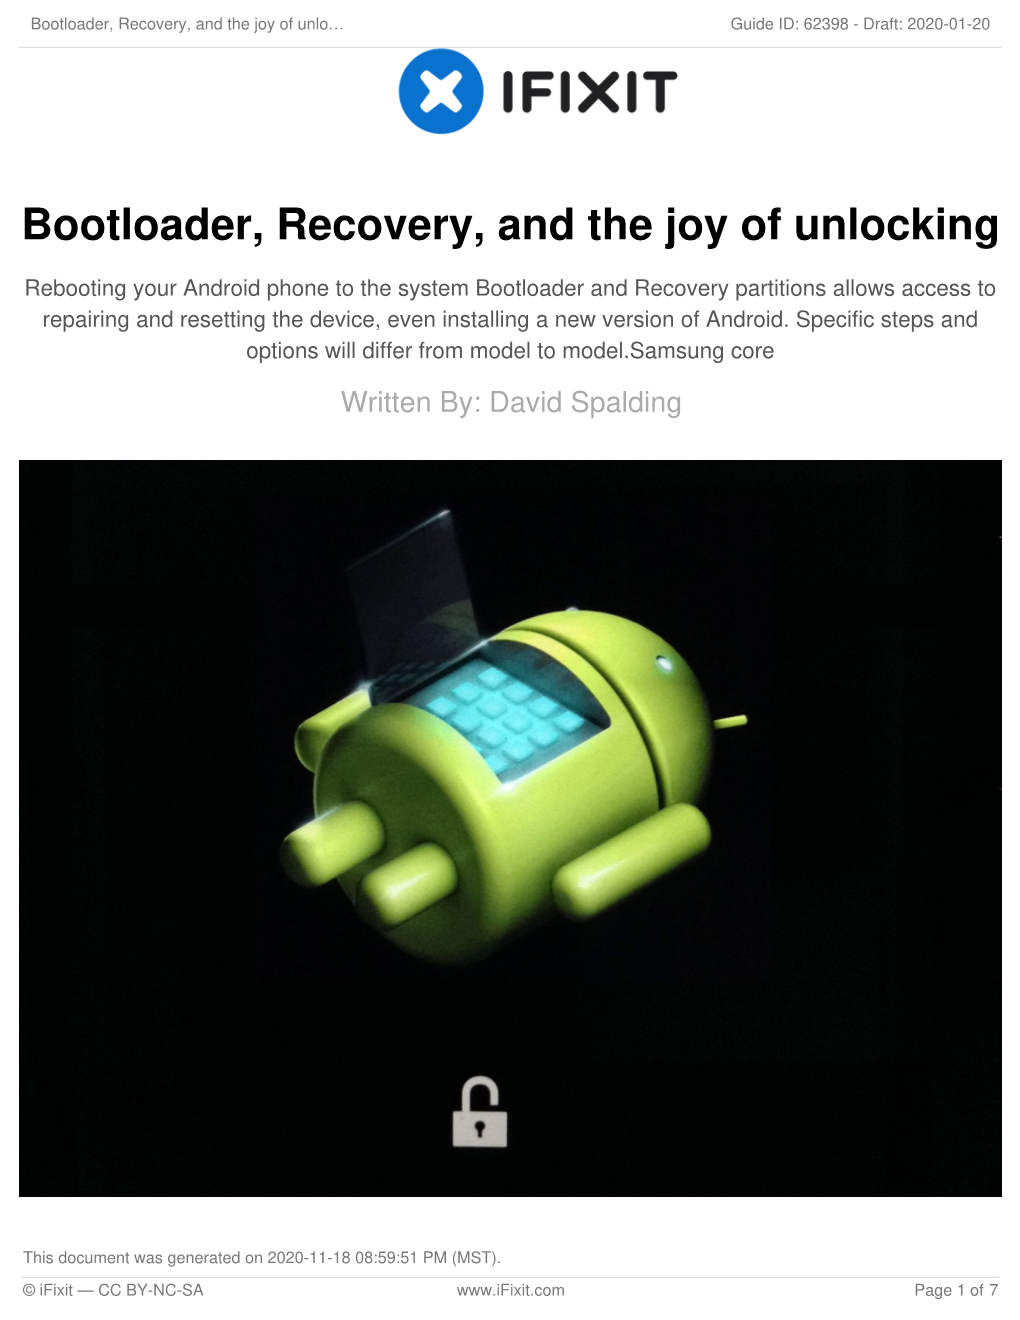 Bootloader, Recovery, and the Joy of Unlocking